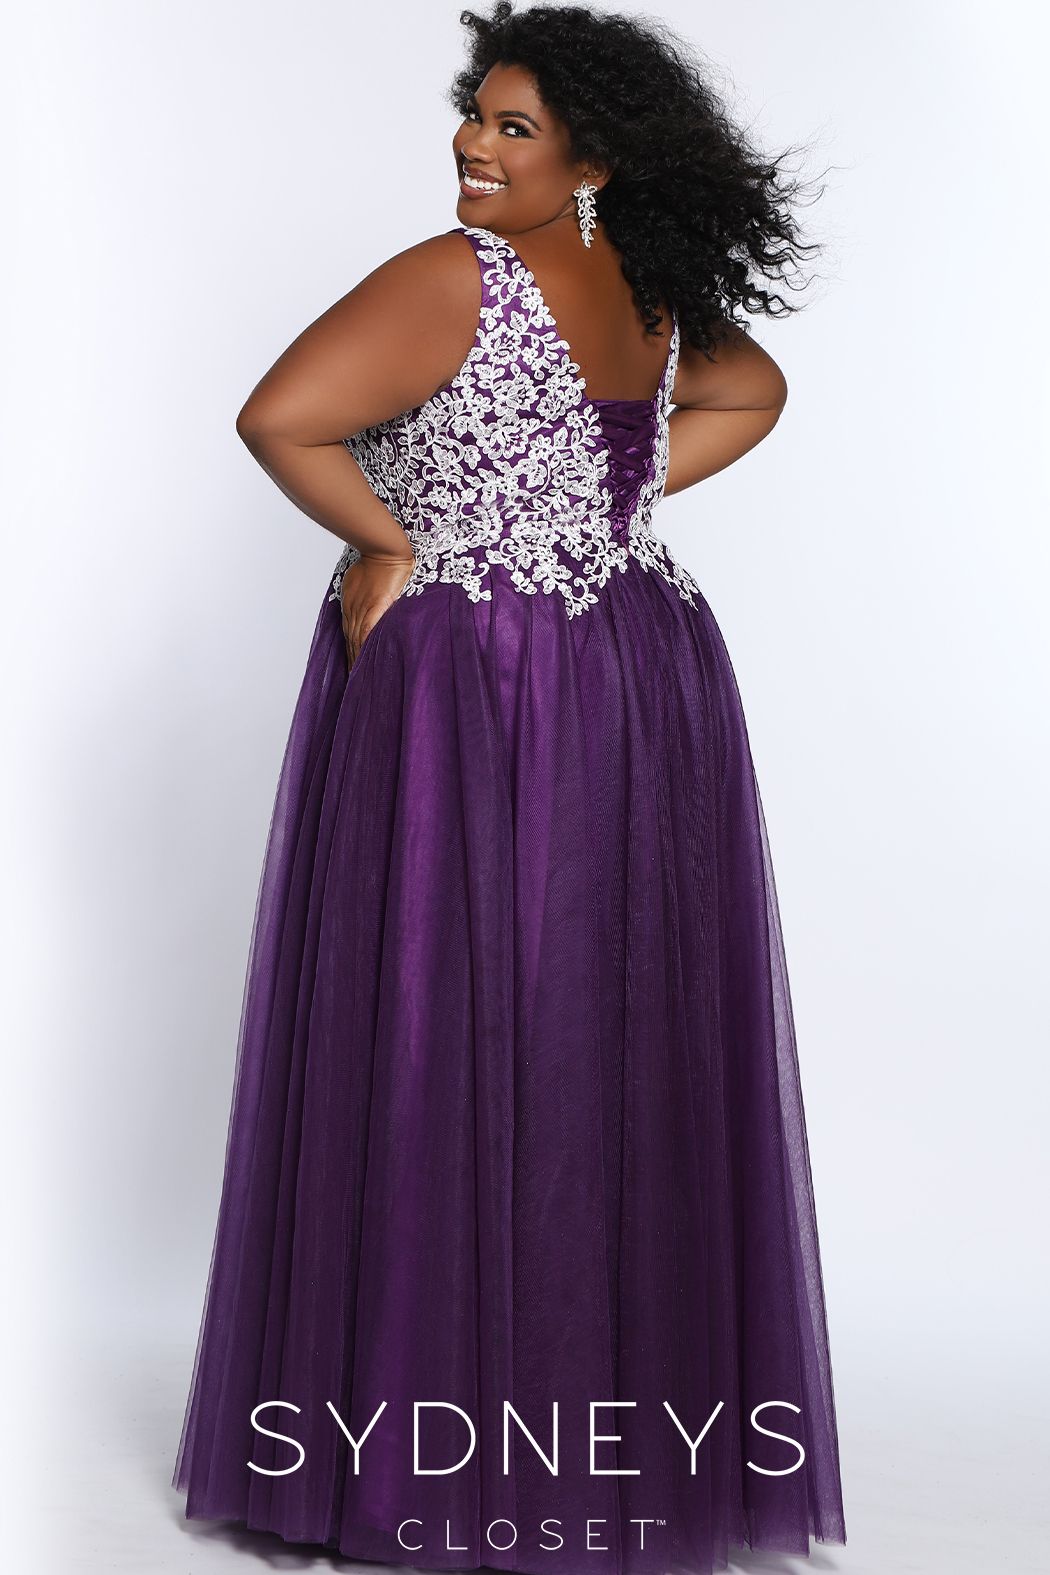 Sydney's Closet 7291 V neckline wide straps lace bodice corset back long tulle ball gown prom dress plus size evening gown   Available colors:  Cherry, Navy, Black, Plum, Light Blue  Available sizes:  14, 16, 18, 20, 22, 24, 26, 28, 30, 32, 34, 36